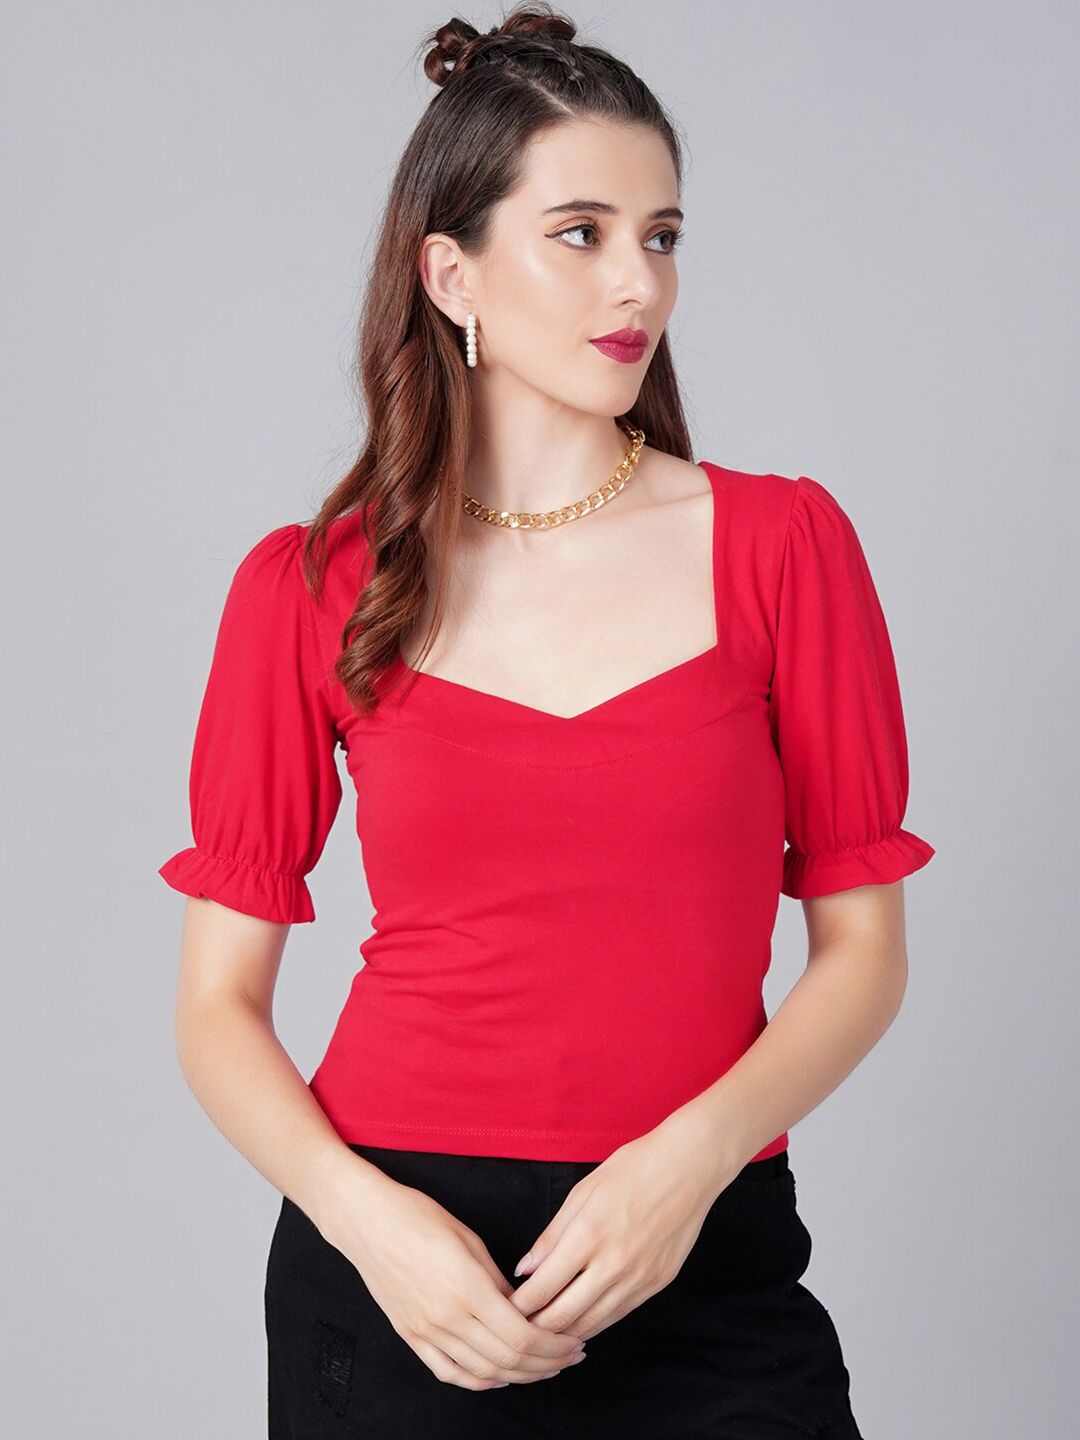 Cation Red Sweetheart Neck Top Price in India